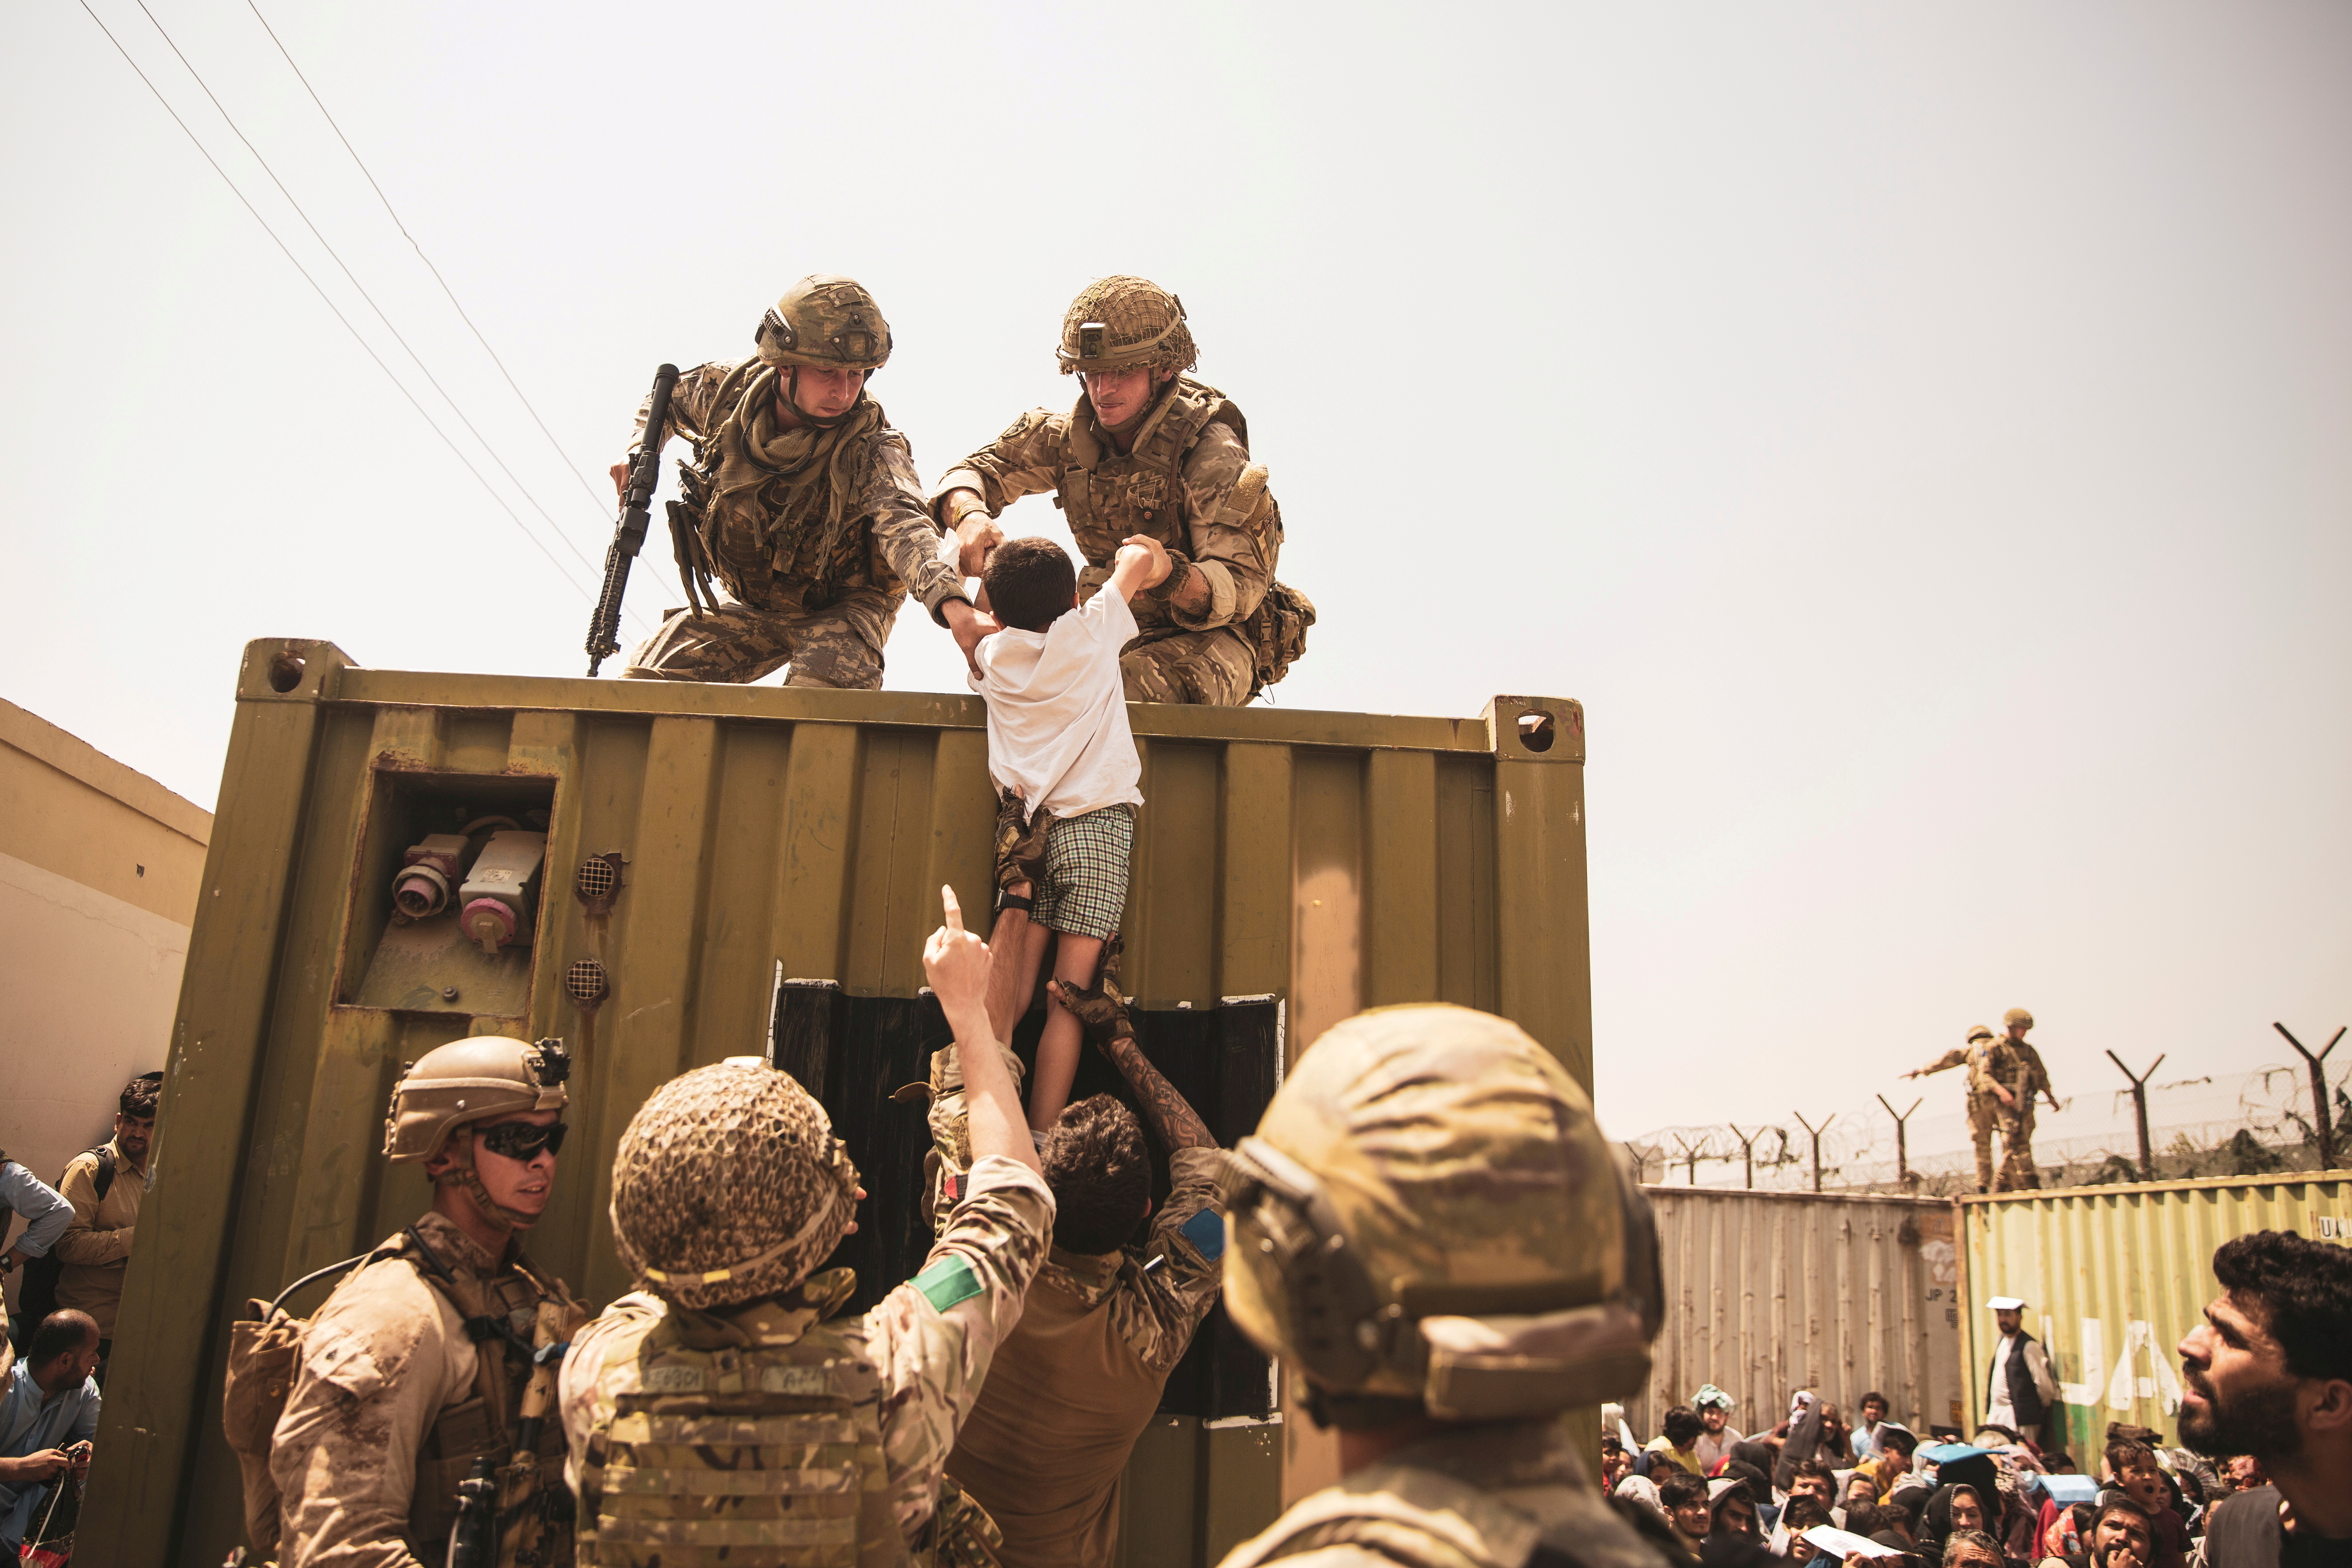 UK coalition forces, Turkish coalition forces, and U.S. Marines assist a child during an evacuation at Hamid Karzai International Airport, Kabul